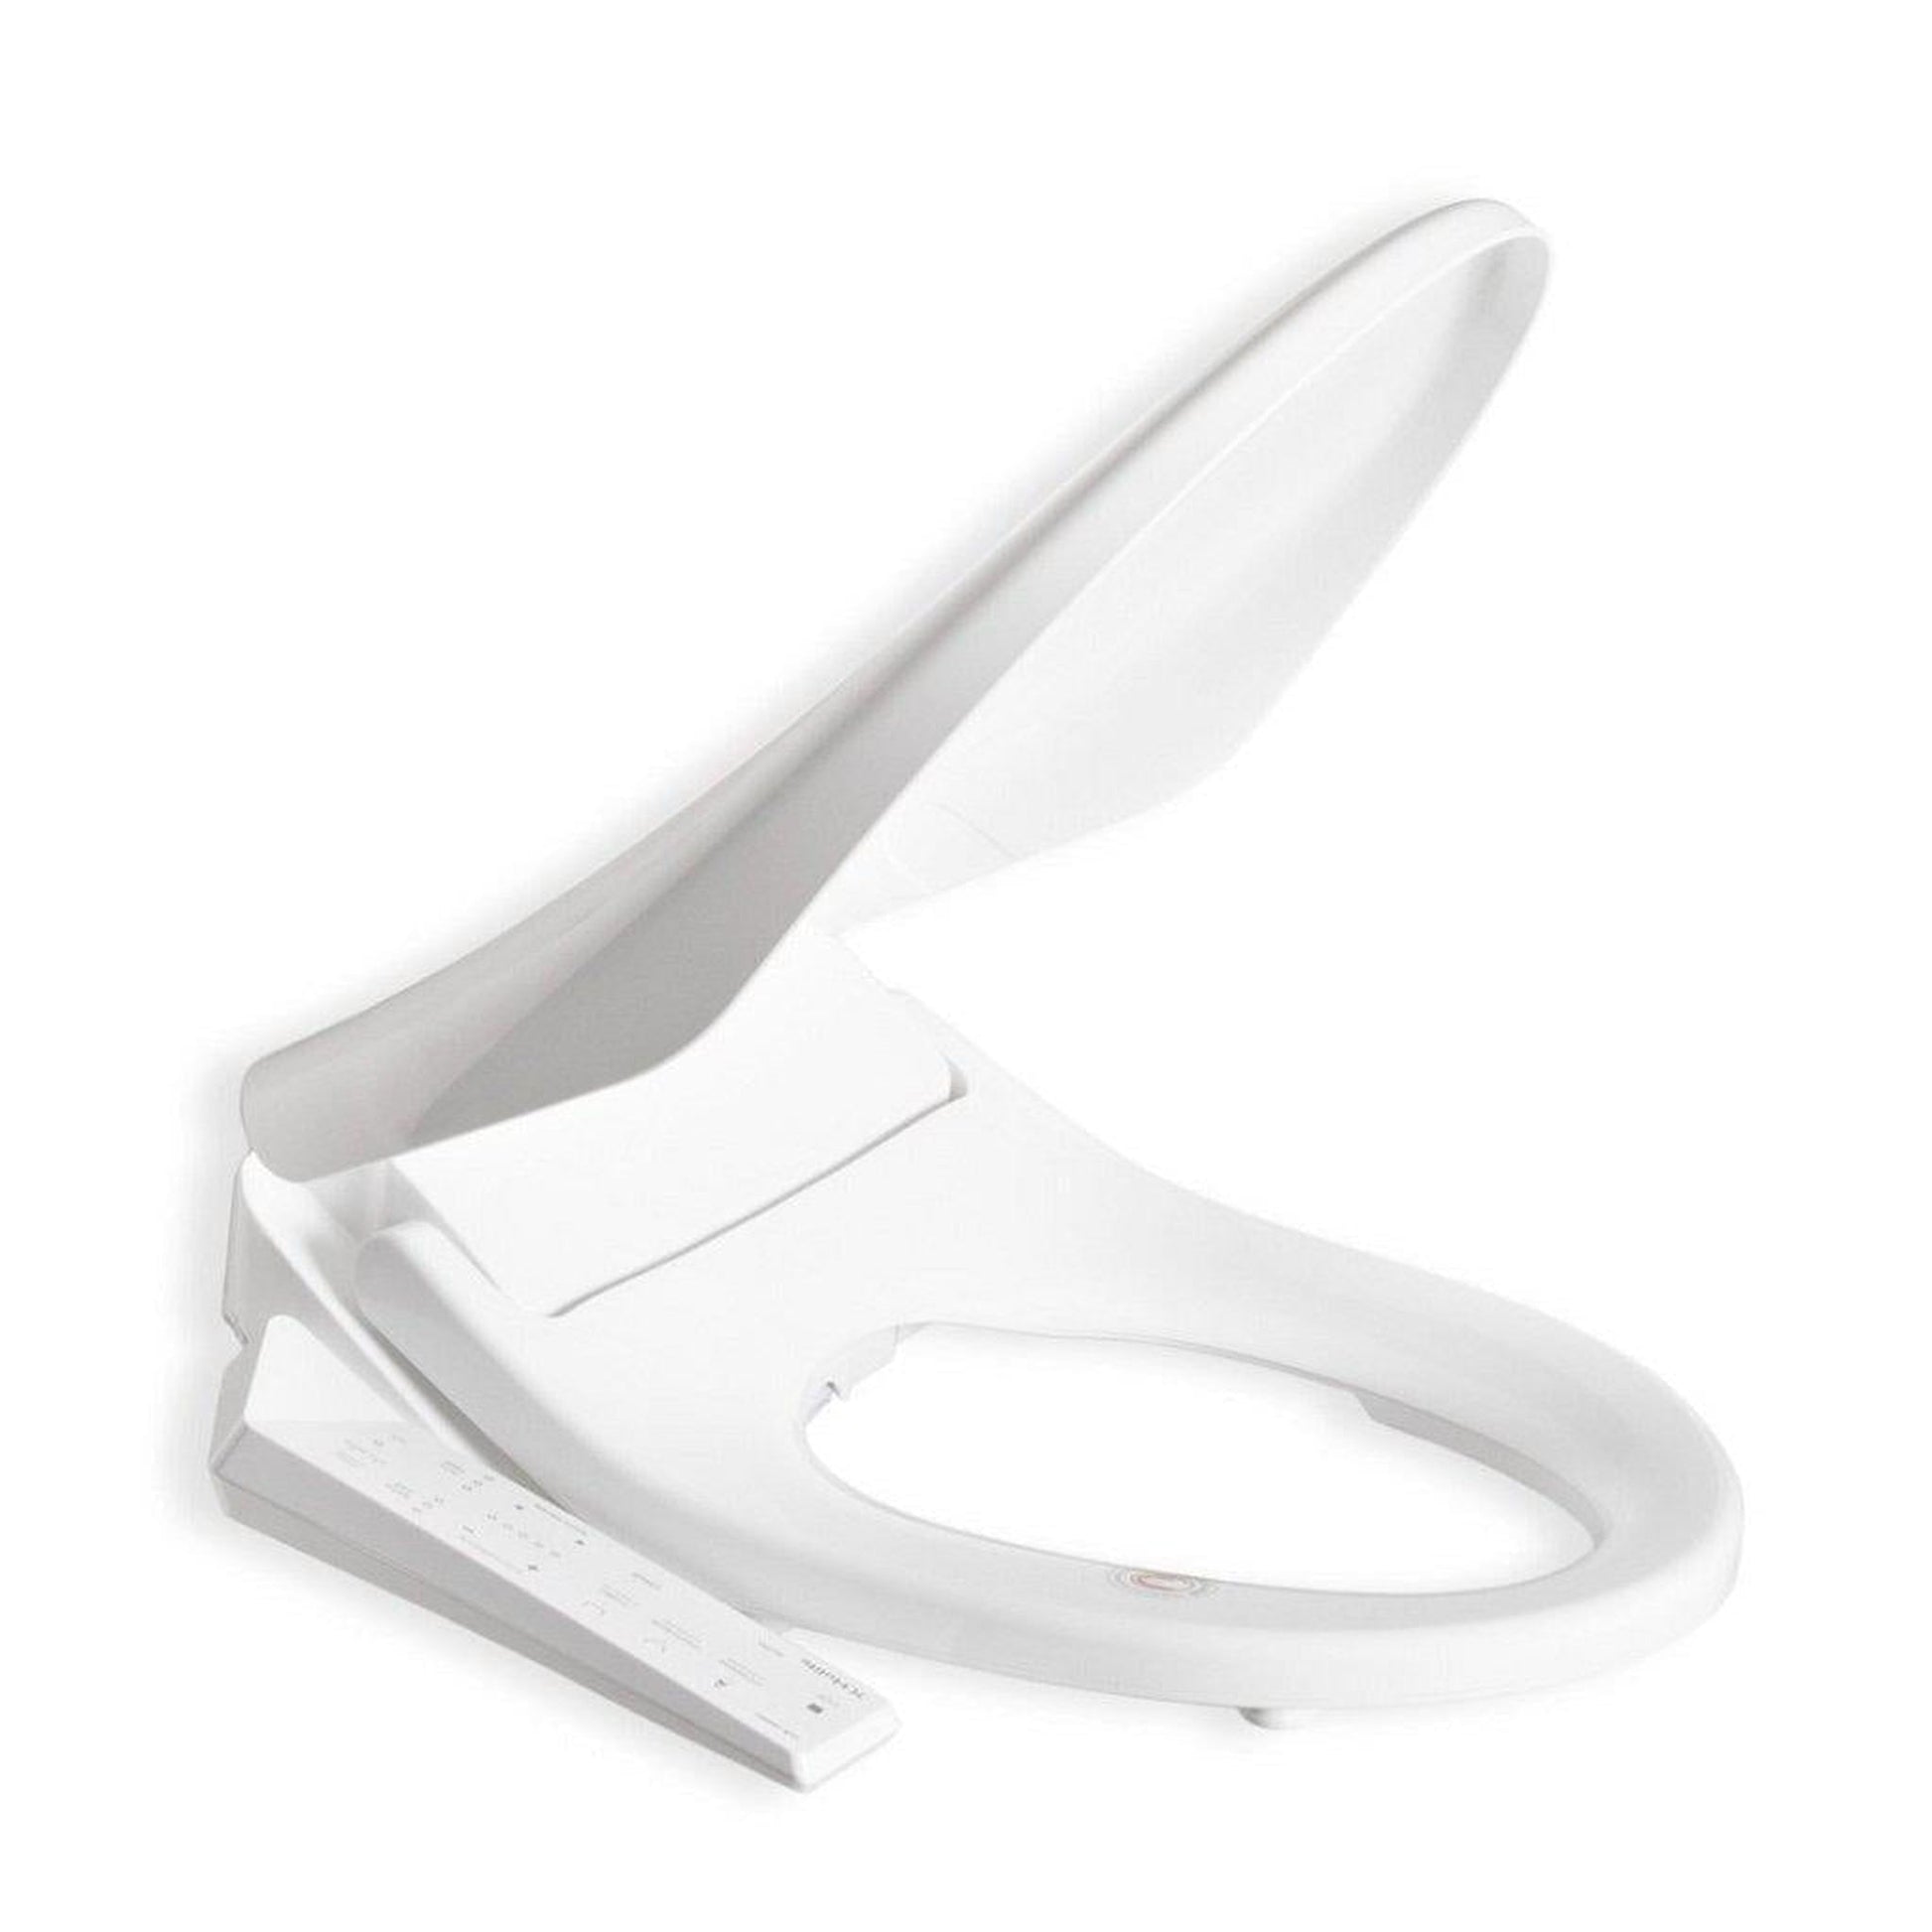 Hulife HLB-1000EC 21" Elongated White Electric Bidet Toilet Seat With Side Touch Control Panel